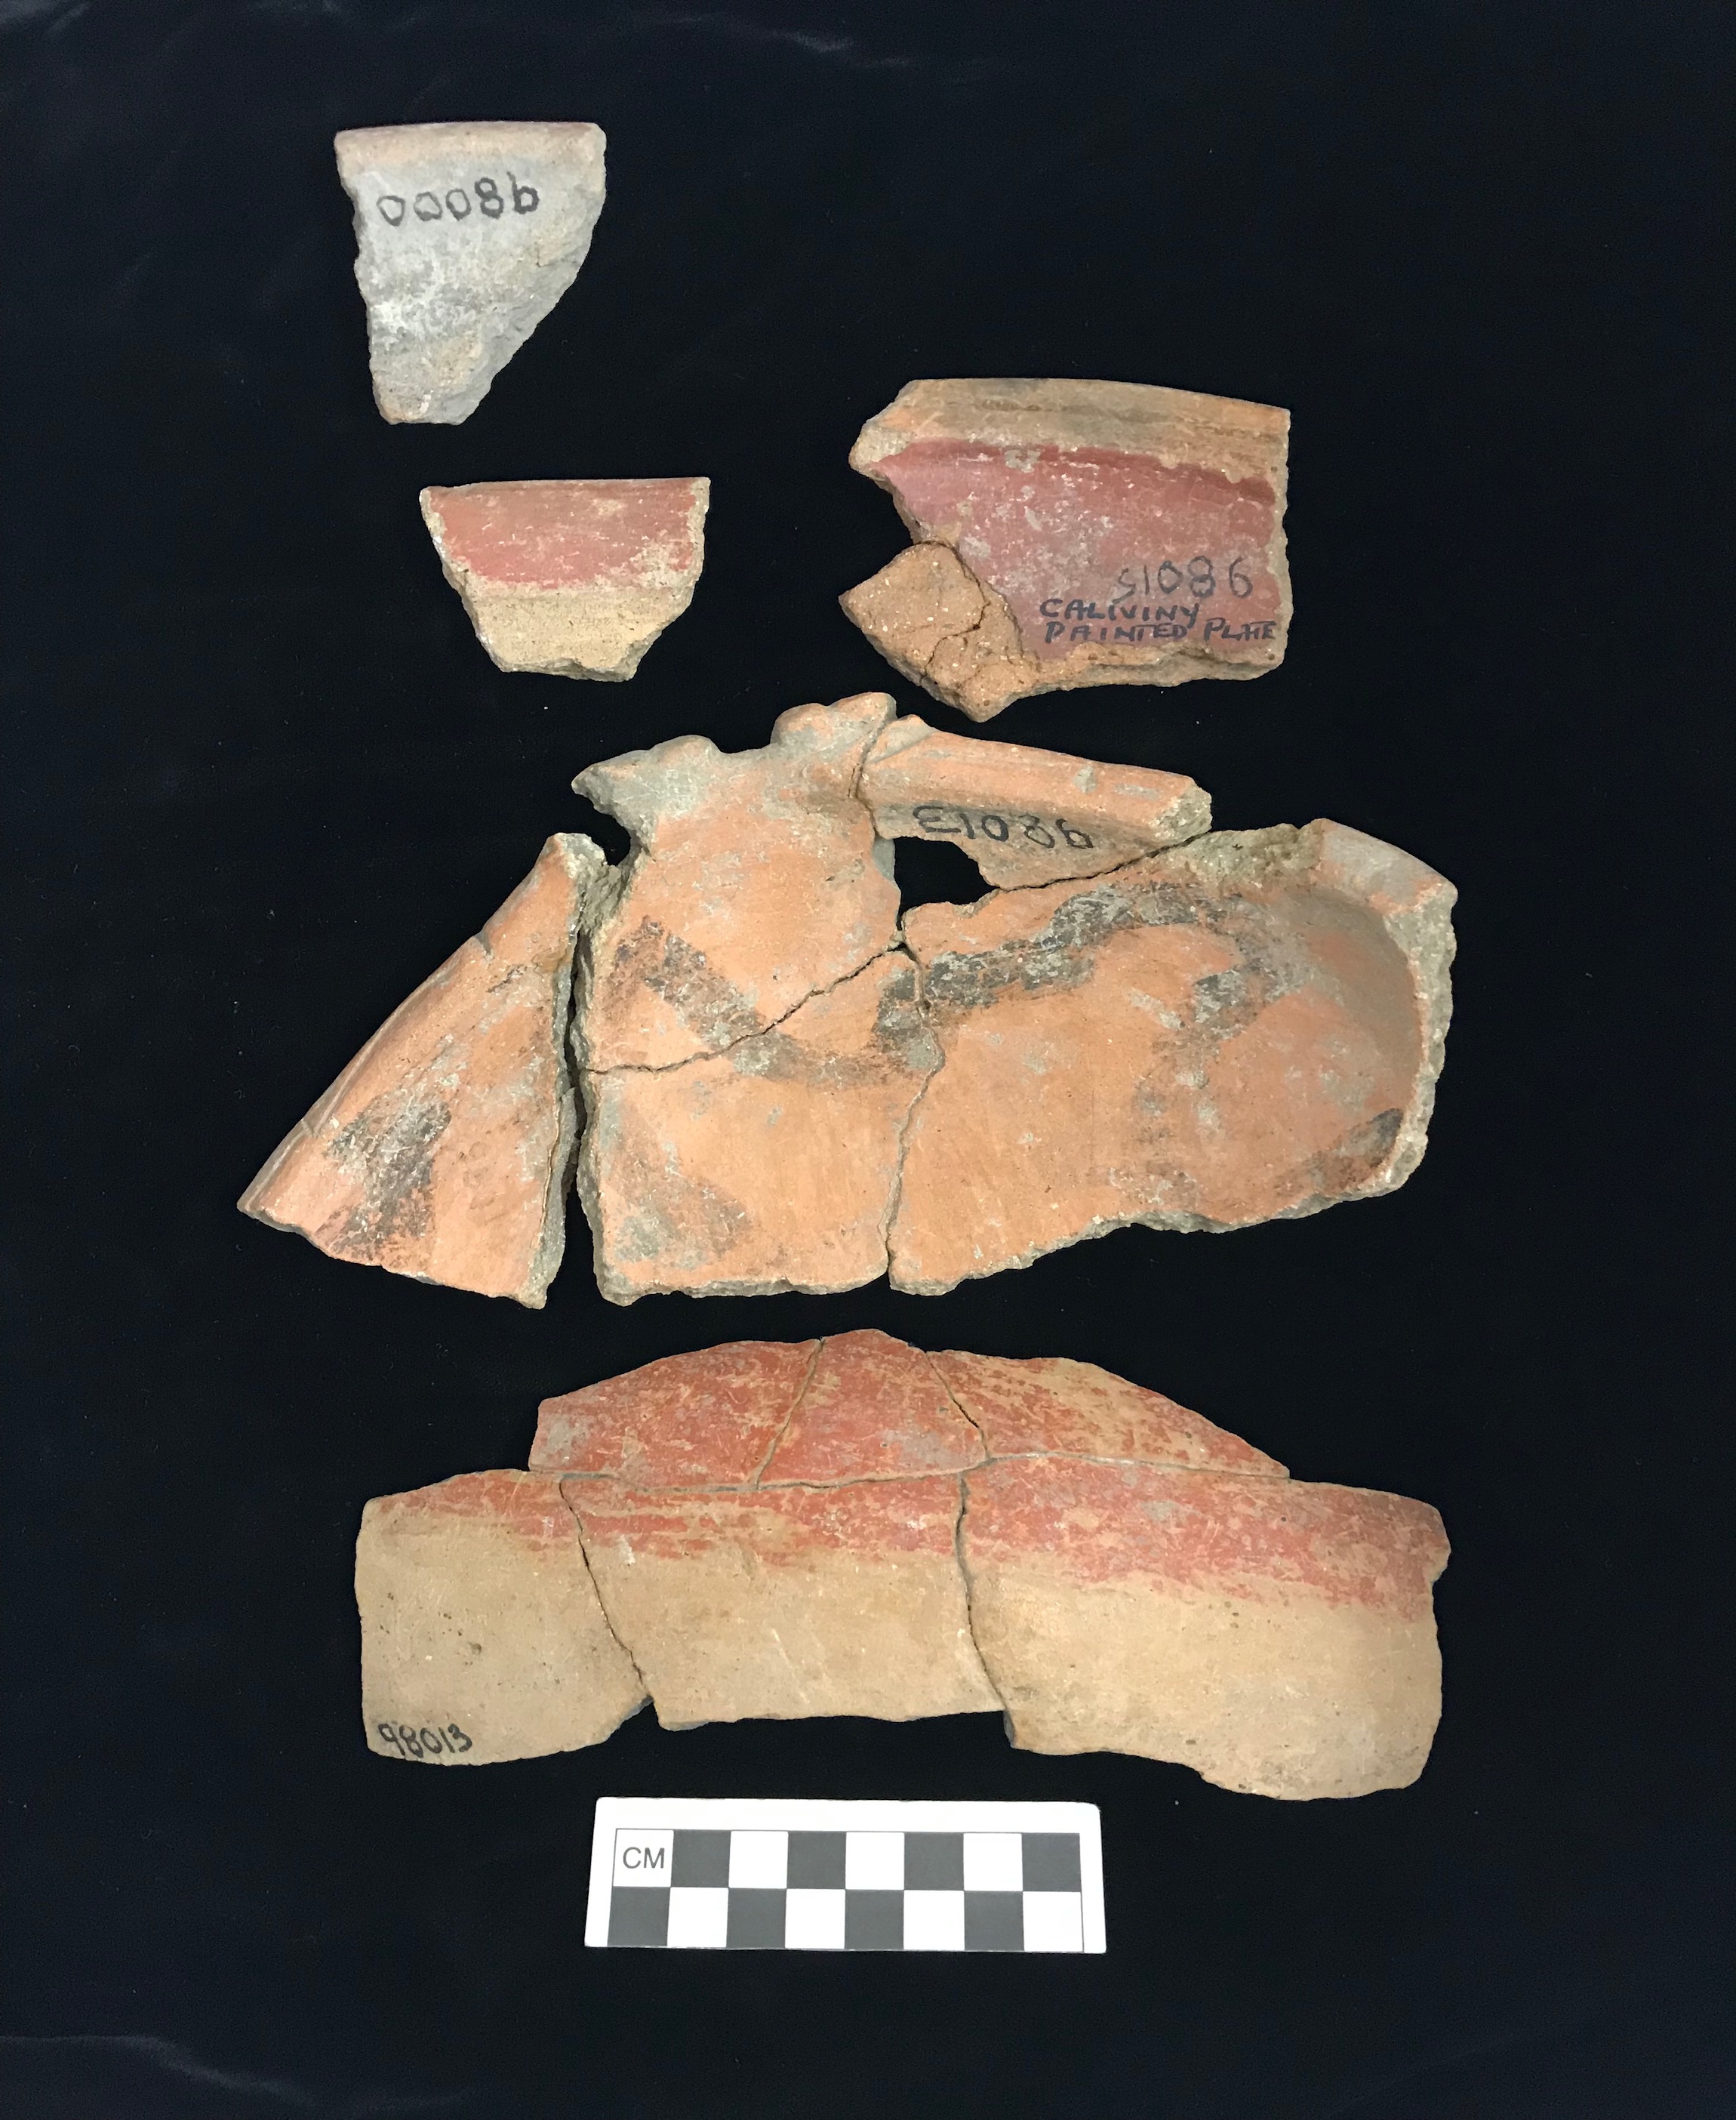 Plate XIX. CALIVINY PAINTED PLATE, DECORATED BASIN, AND WESTERHALL RED-PAINTED SHERDS. FLMNH Acc. Nos. 98000, 98013, and 98015. 